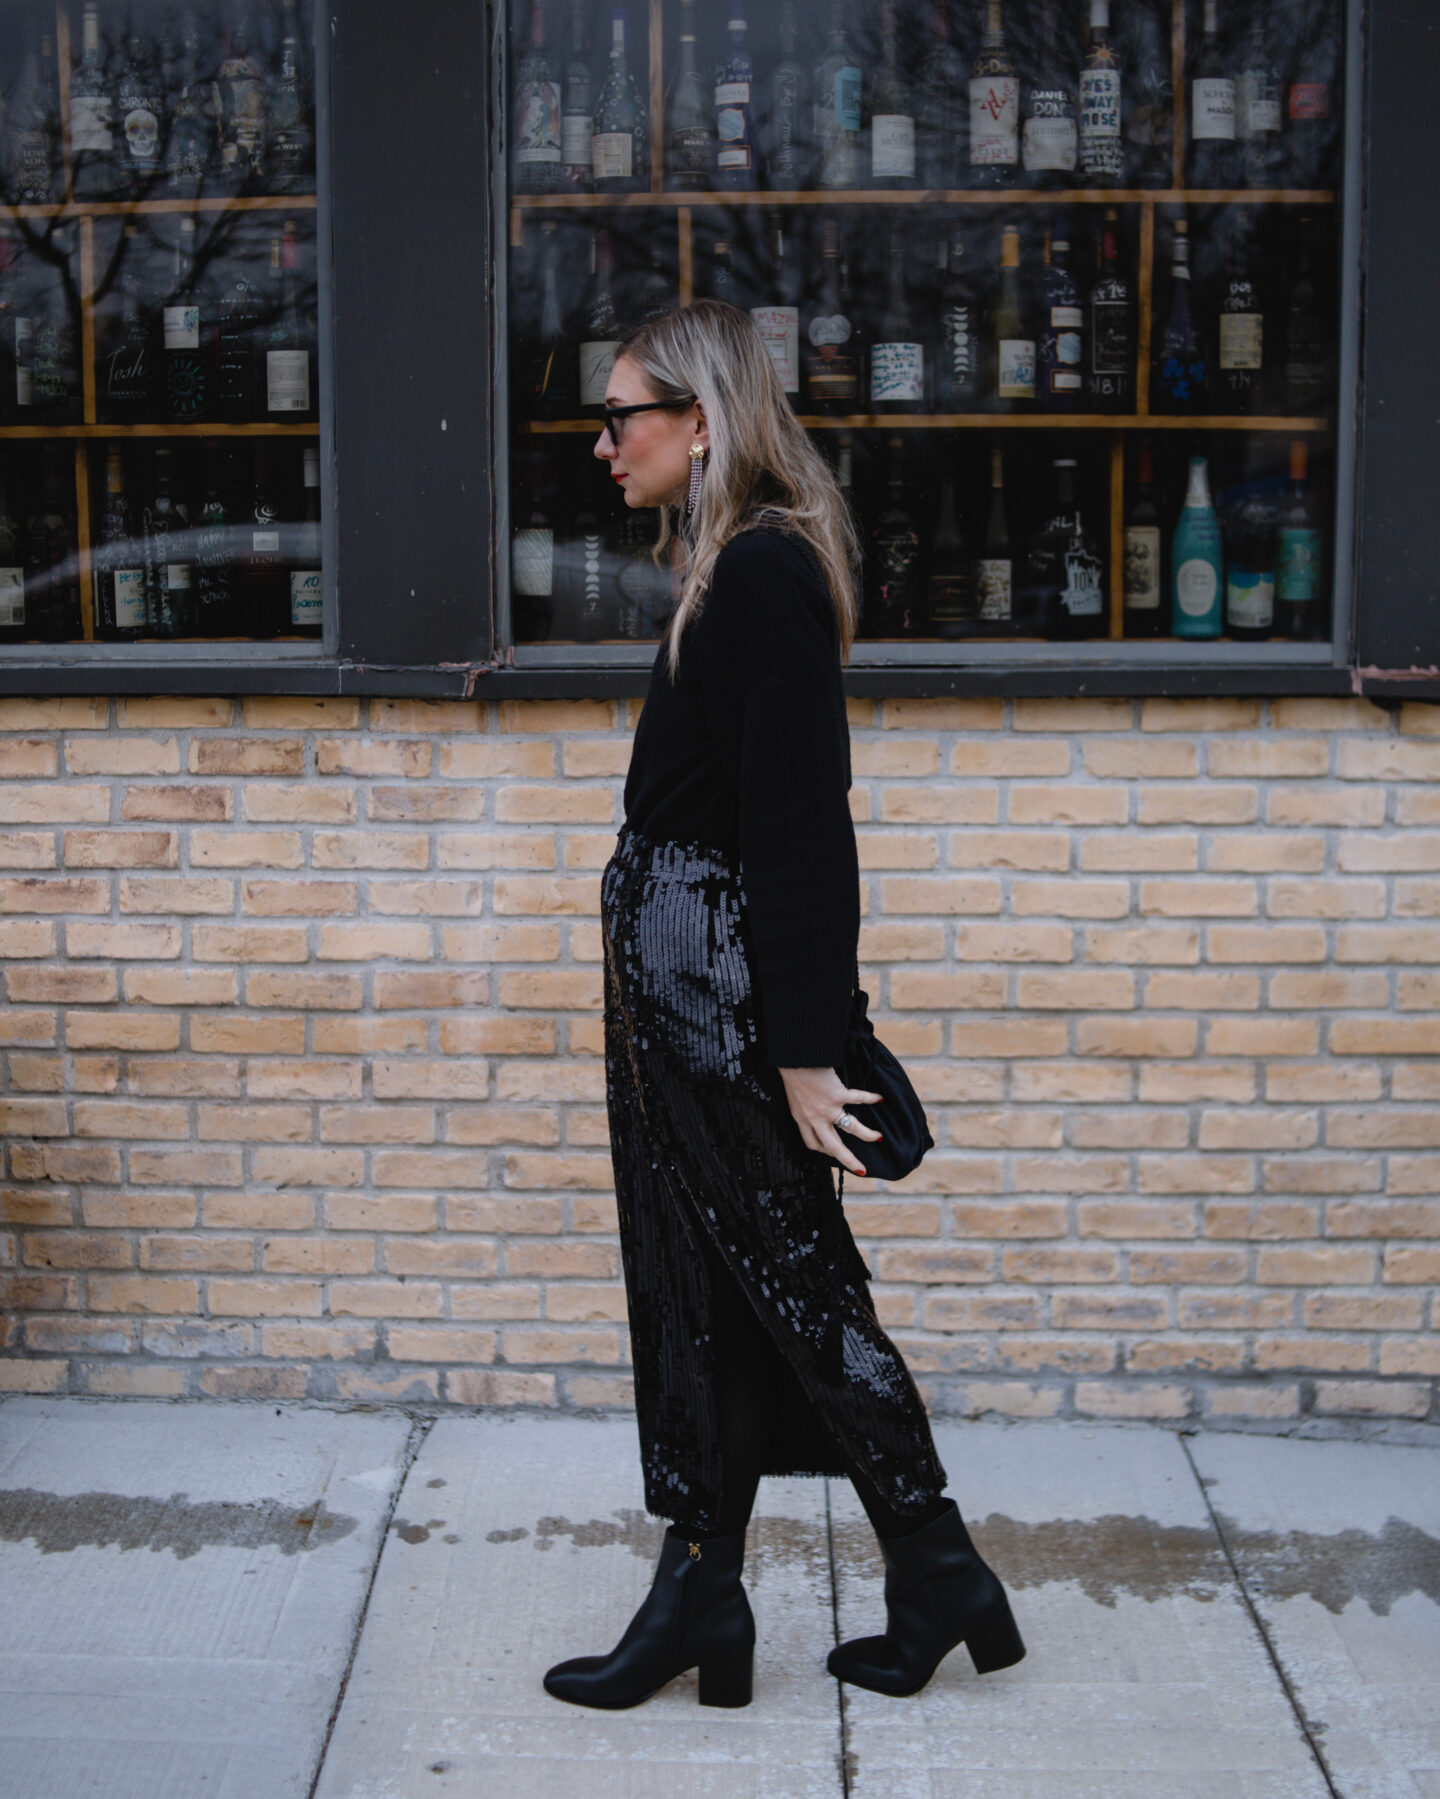 Karin Emily wears a black turtleneck sweater, sequin skirt, and black heeled booties with a pair of cat eye sunglasses